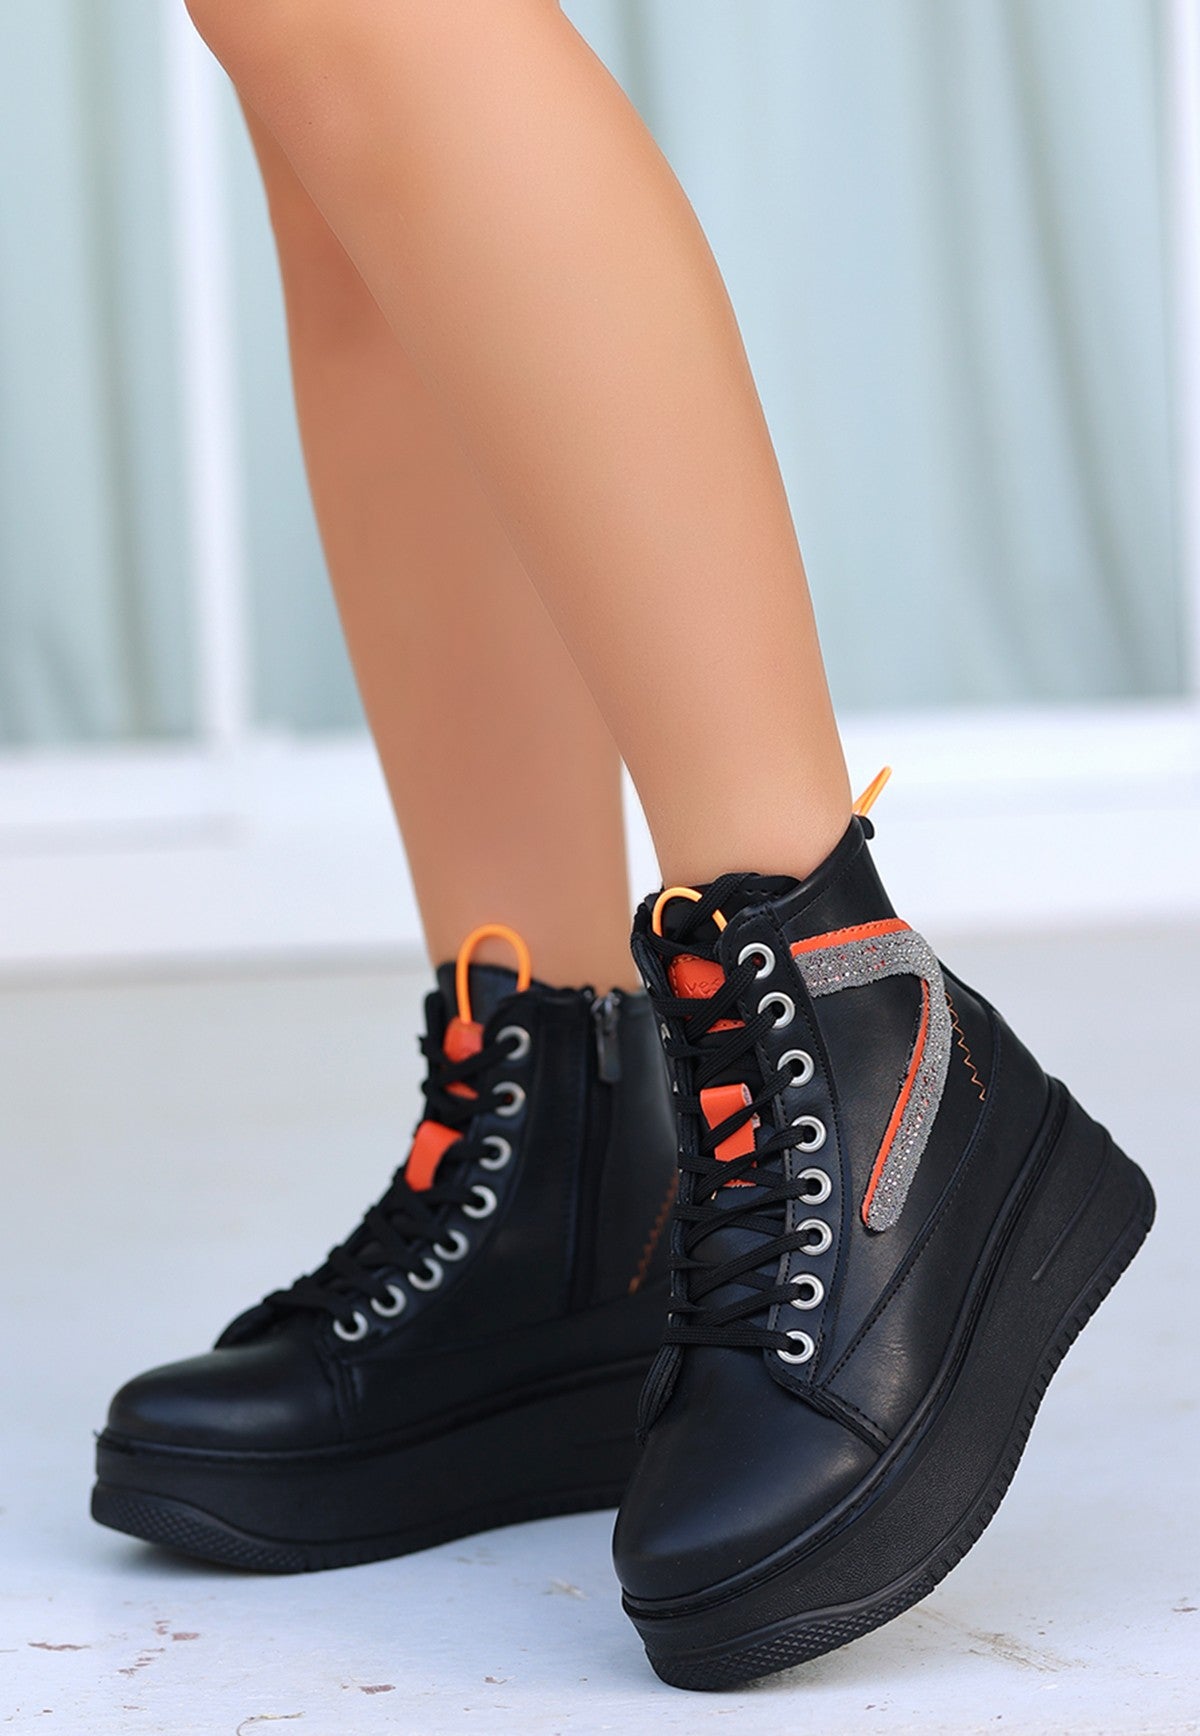 Women's Pone Black Skin Orange Detailed Lace Up Sneakers Boots - STREETMODE ™